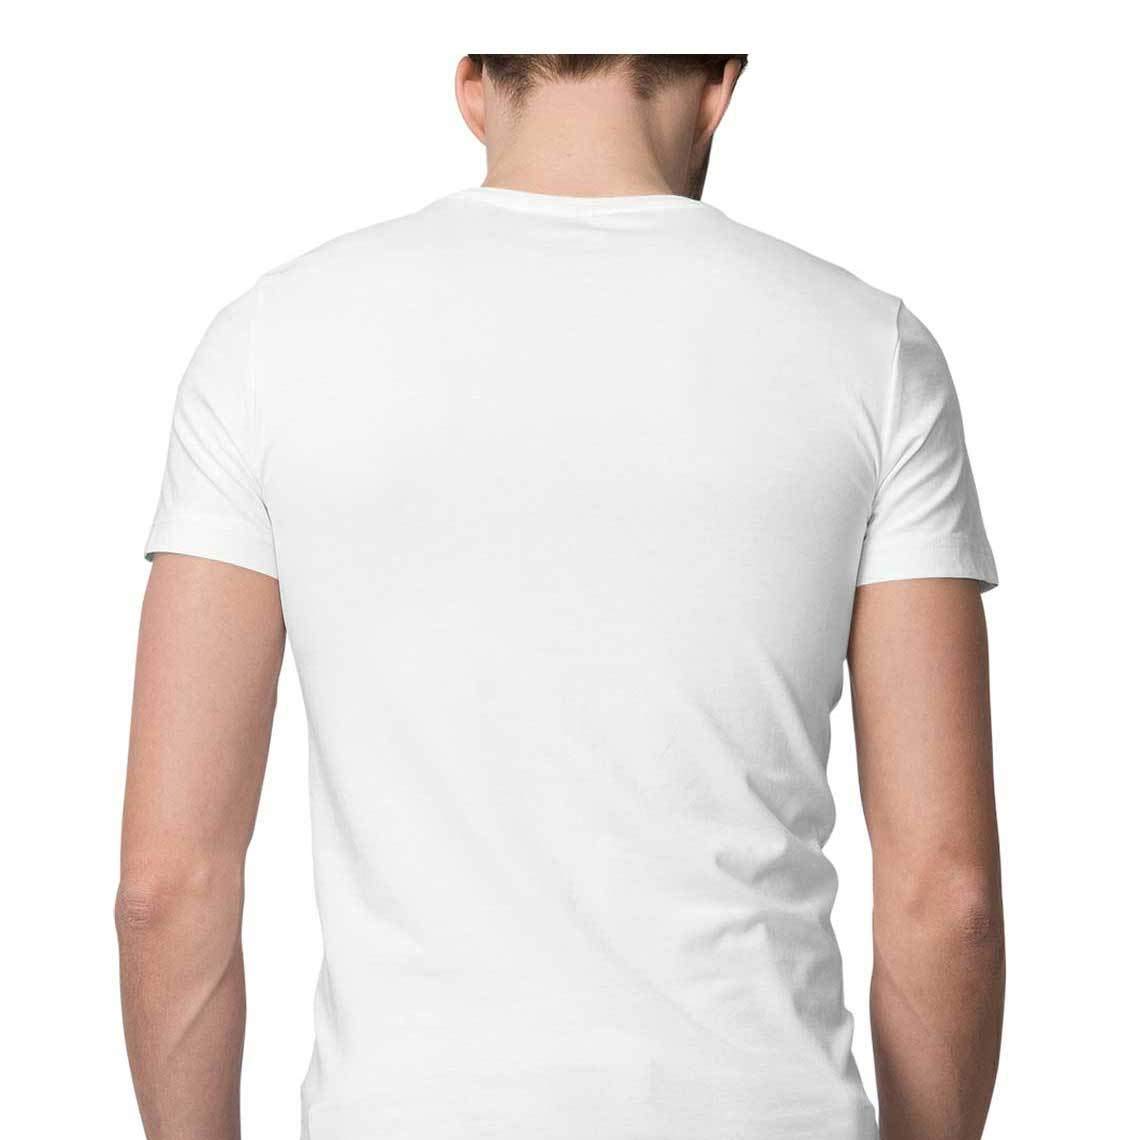 Fathers day Printed Tshirt for Men|Graphic Printed White t shirts for dads| No 1 dad